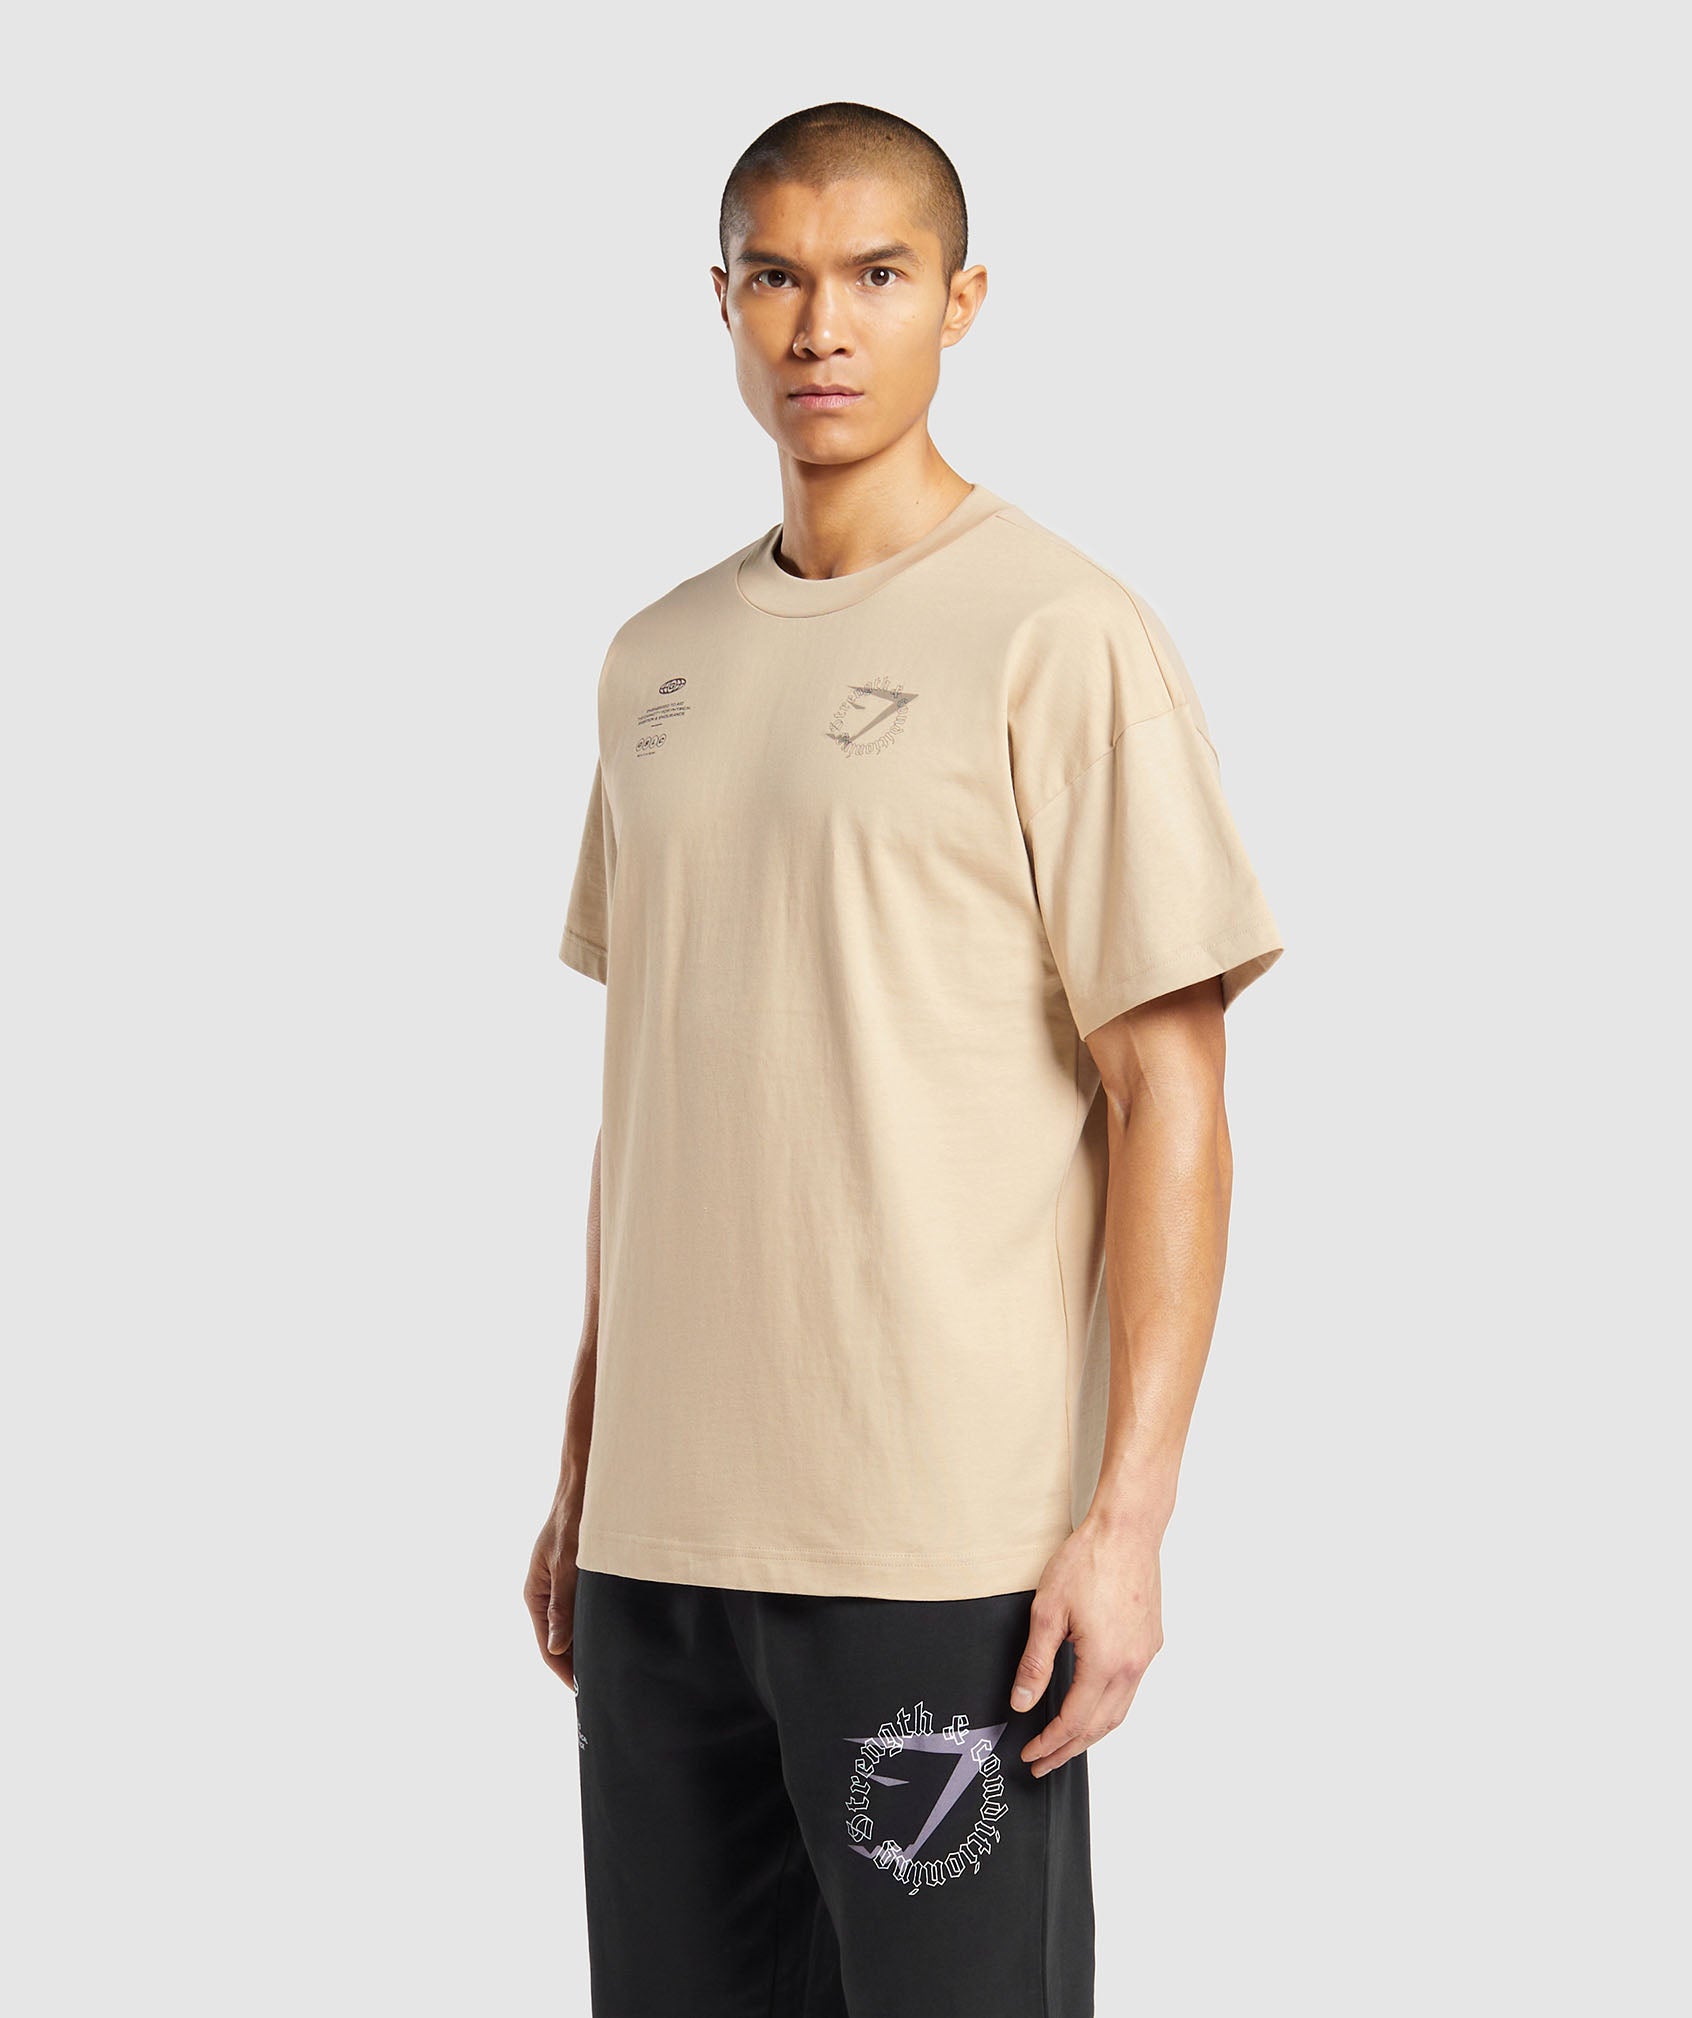 Strength and Conditioning T-Shirt in Vanilla Beige - view 3